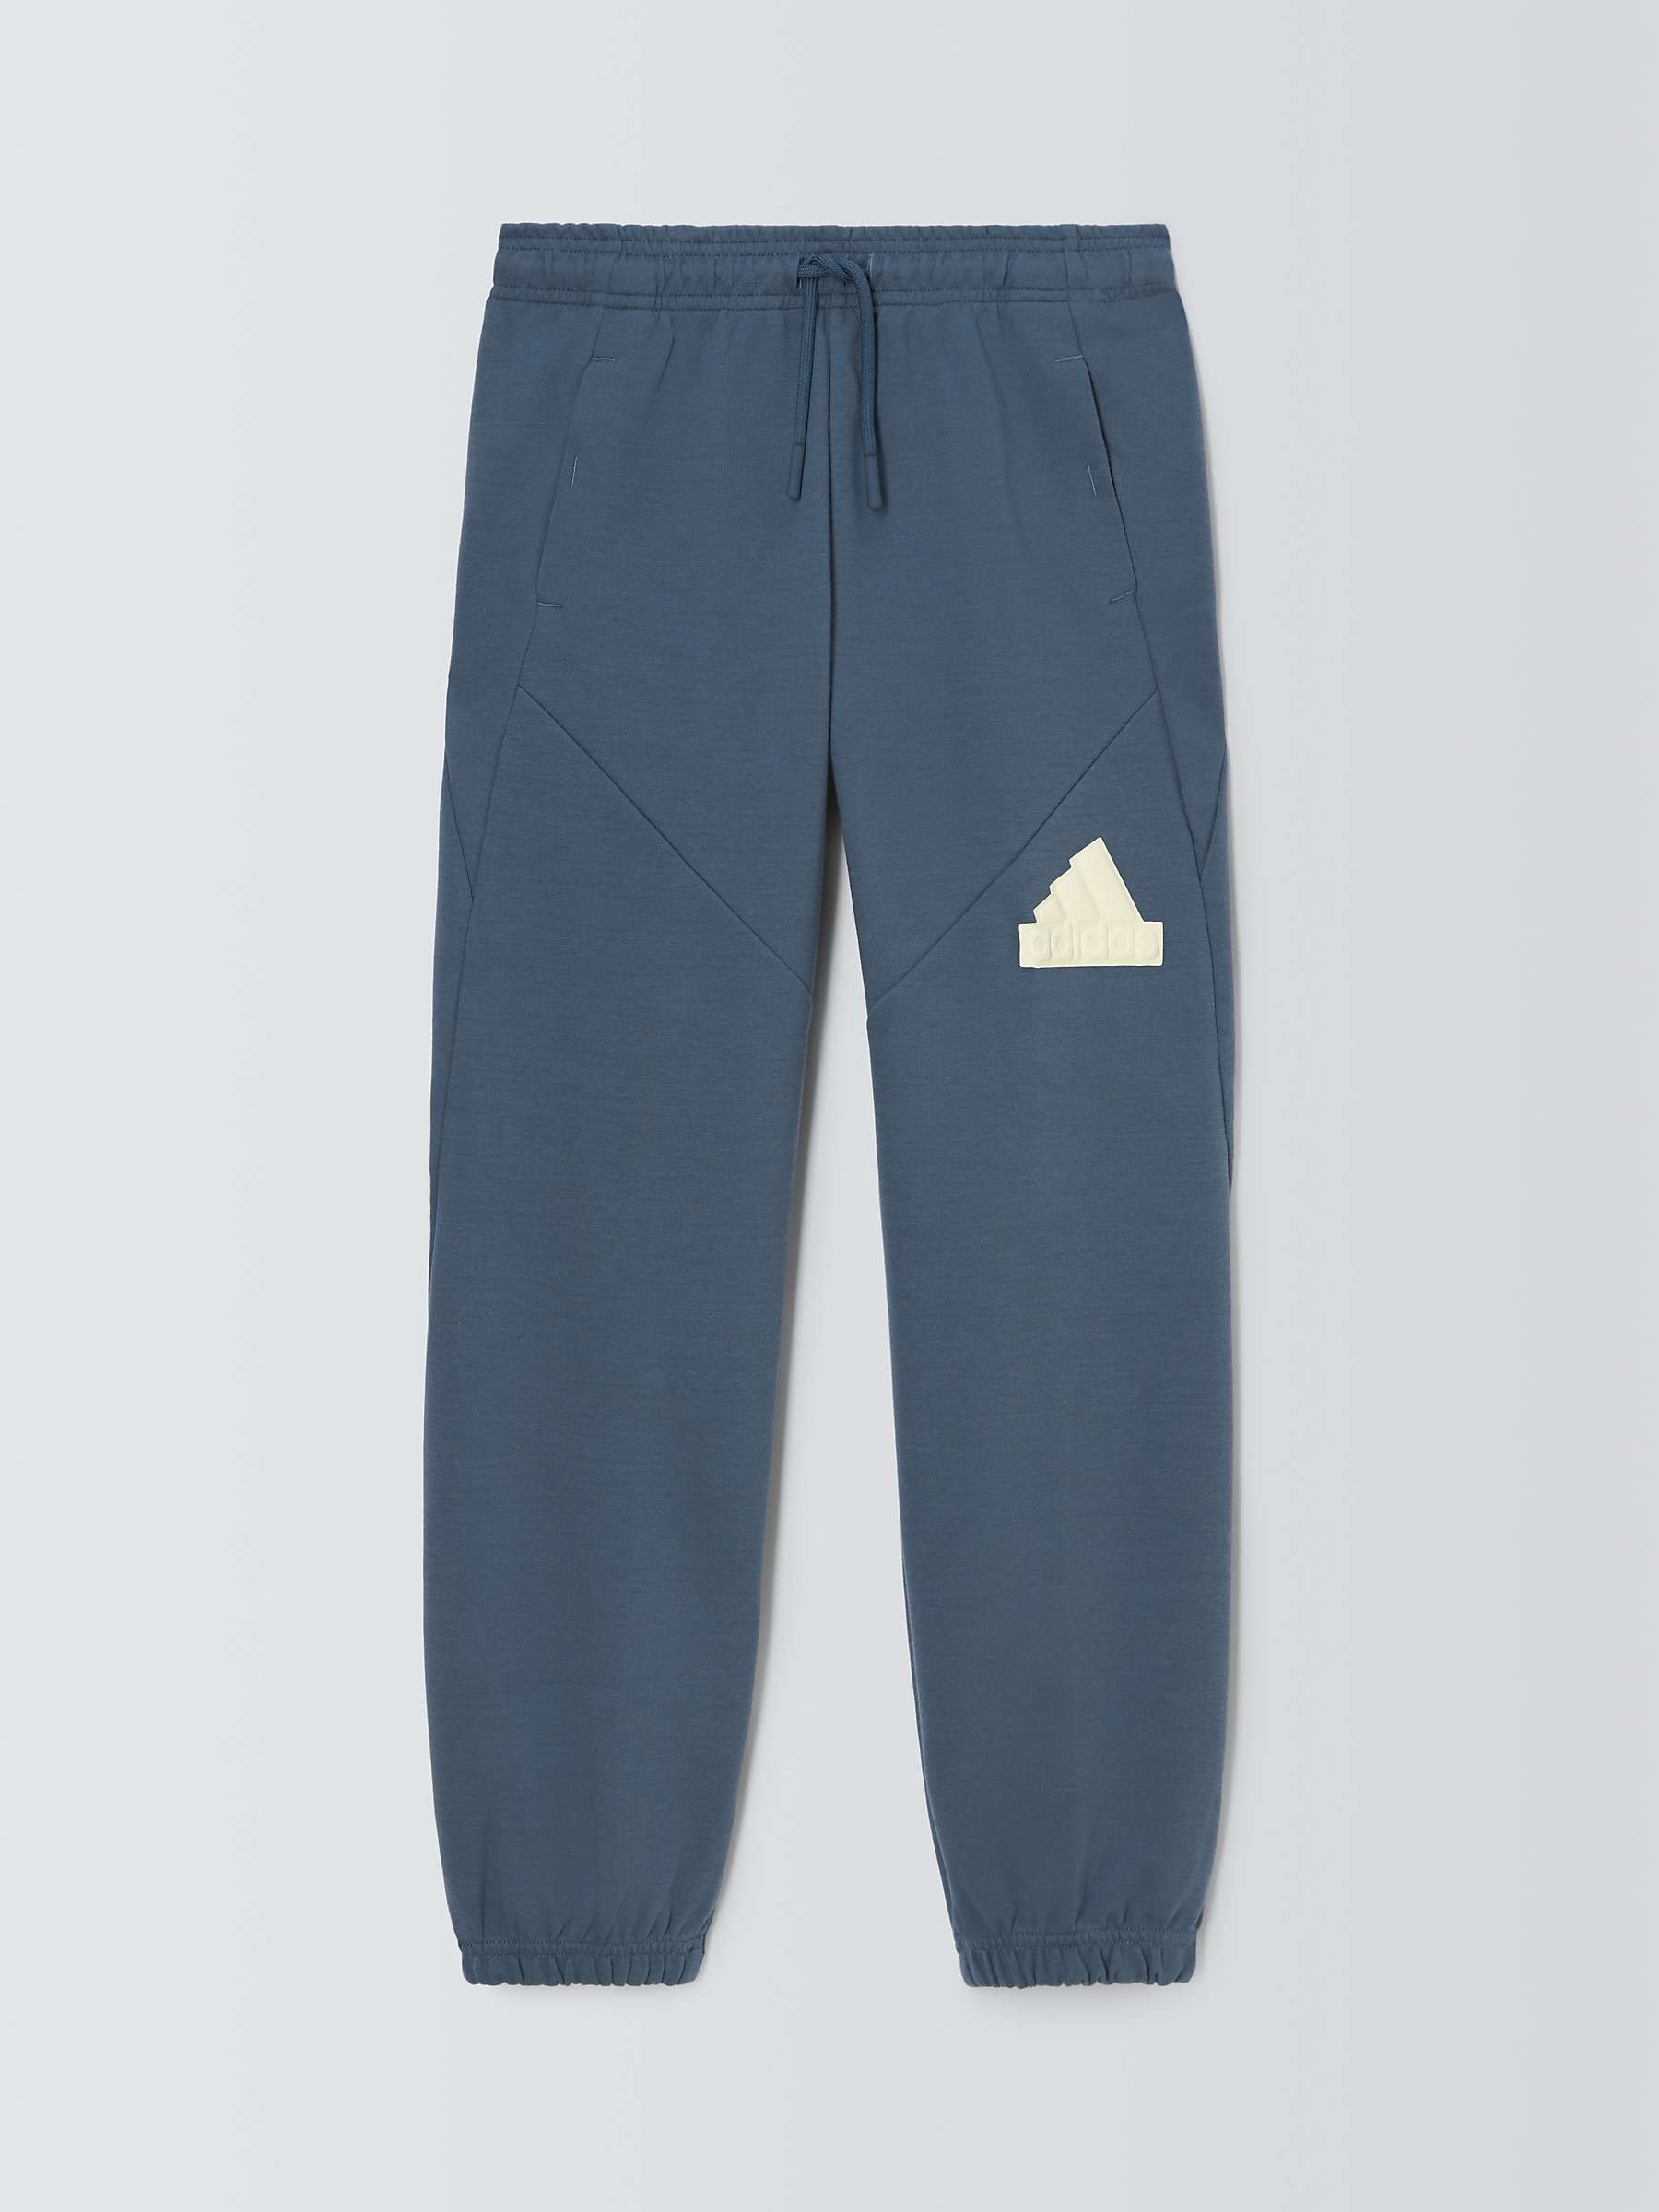 Buy adidas Kids' Future Icons Logo Joggers, Prloin/Ivory Online at johnlewis.com